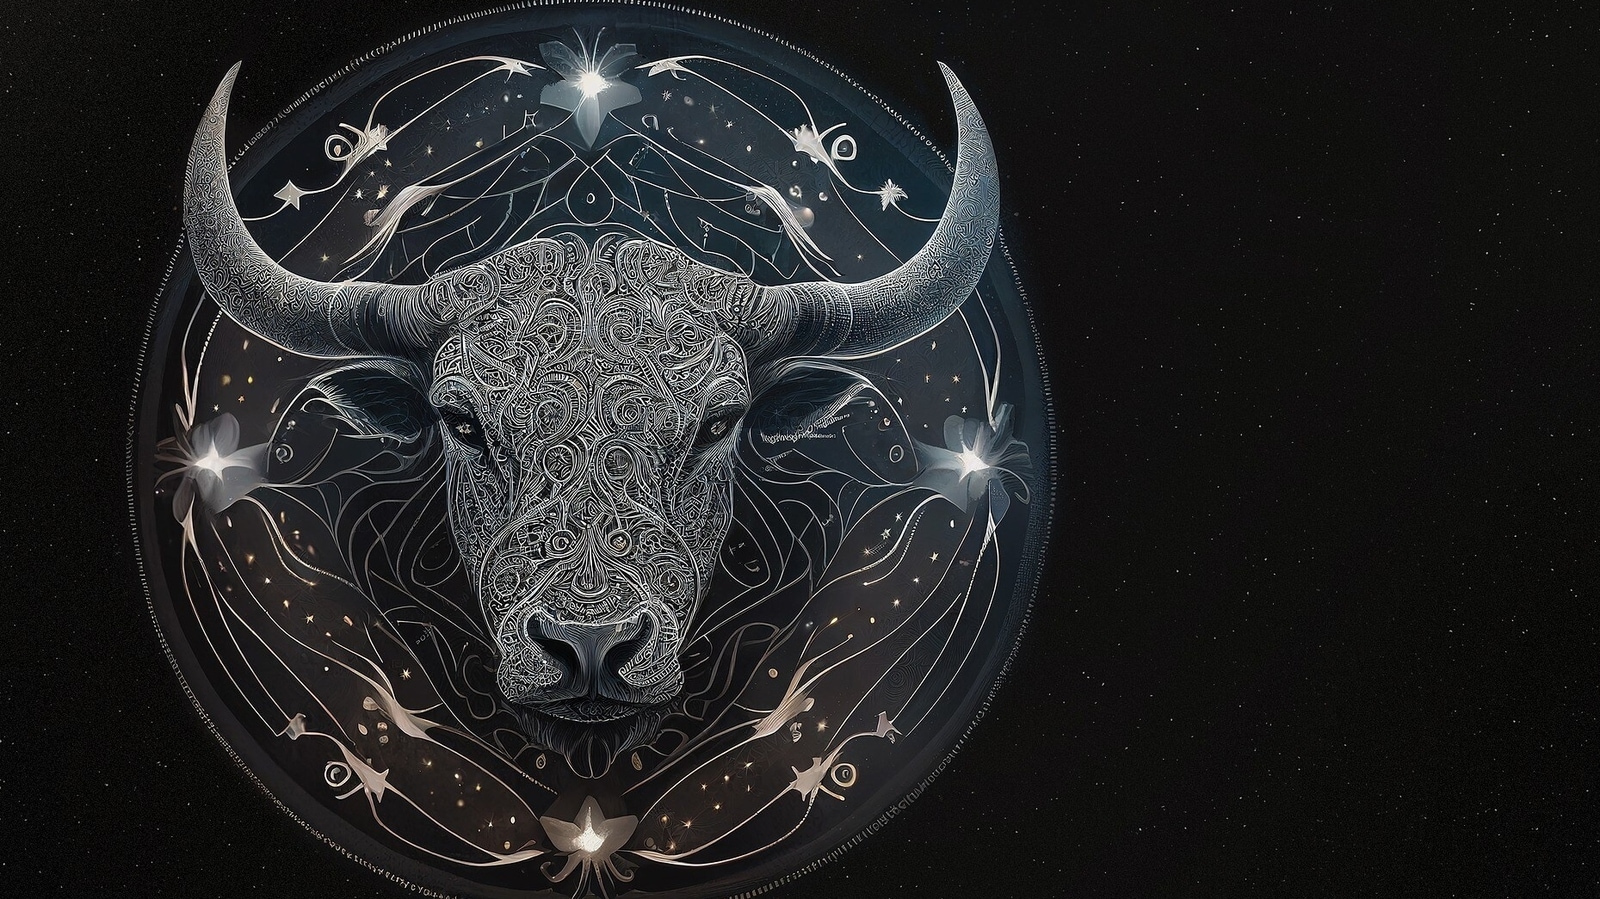 Mars turns direct in Taurus Align your life force to achieve your